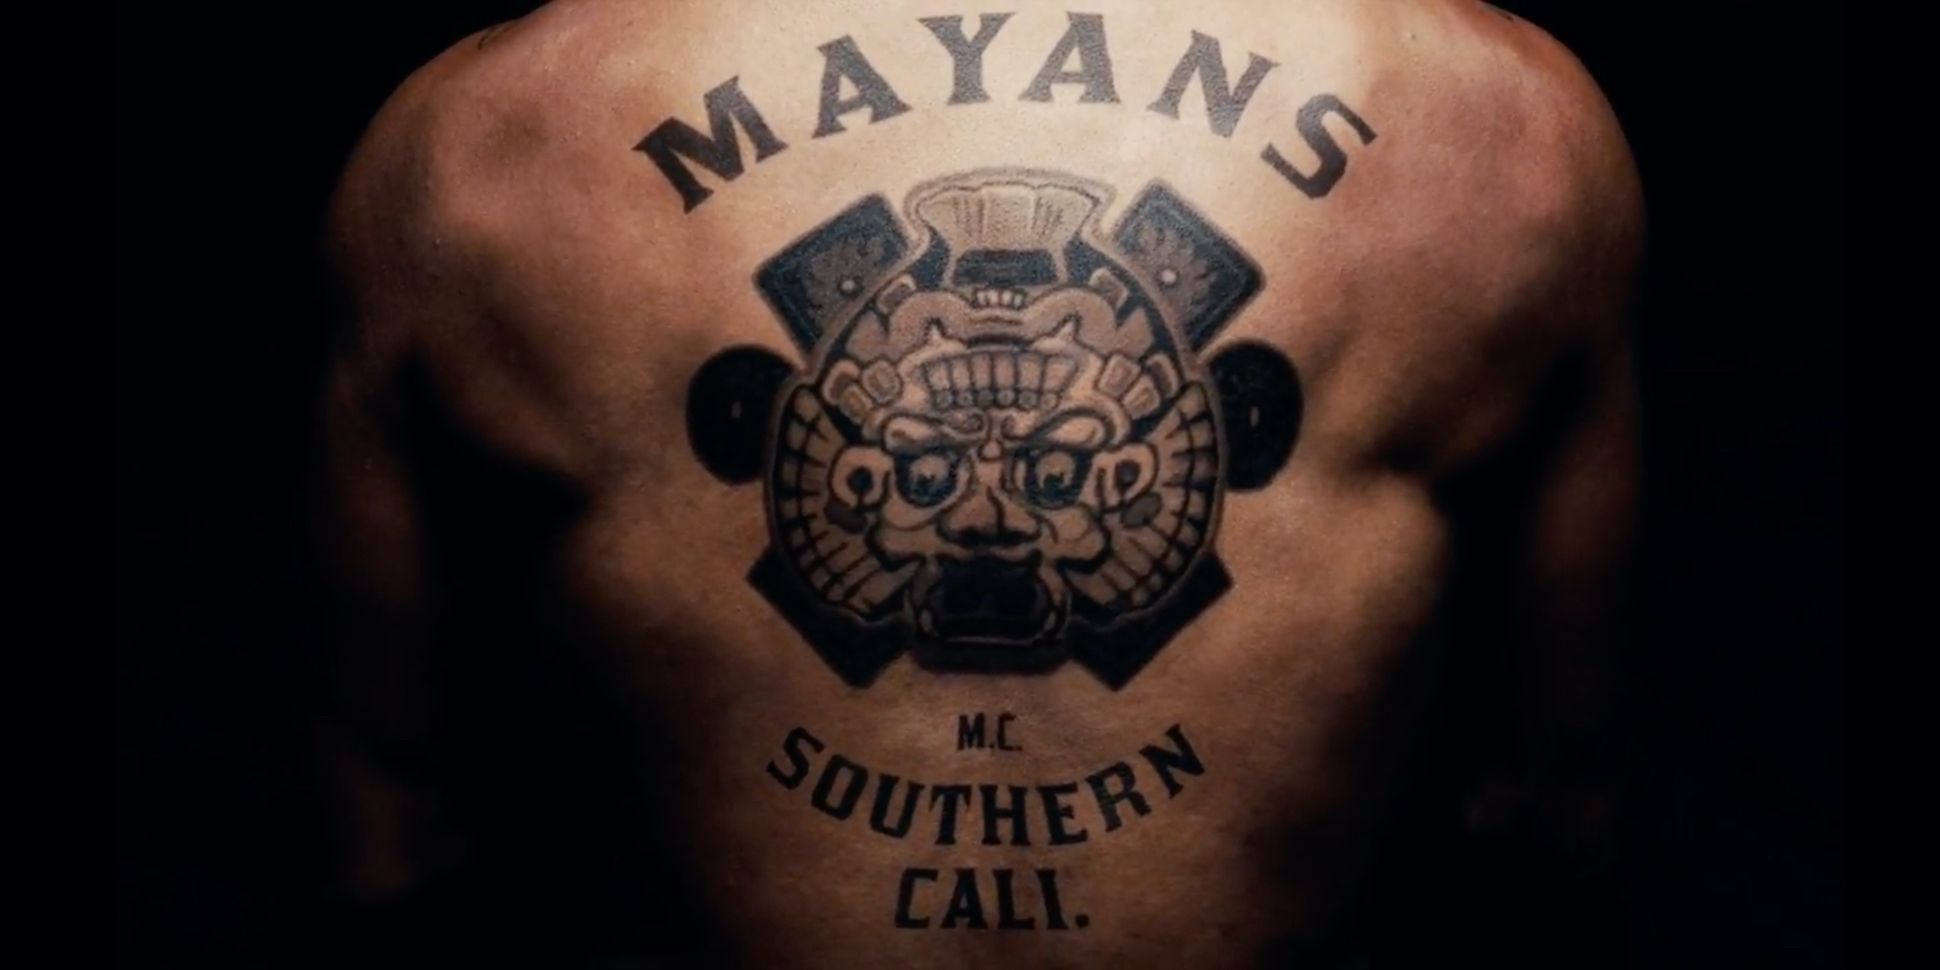 A man's back with a Mayans MC tattoo